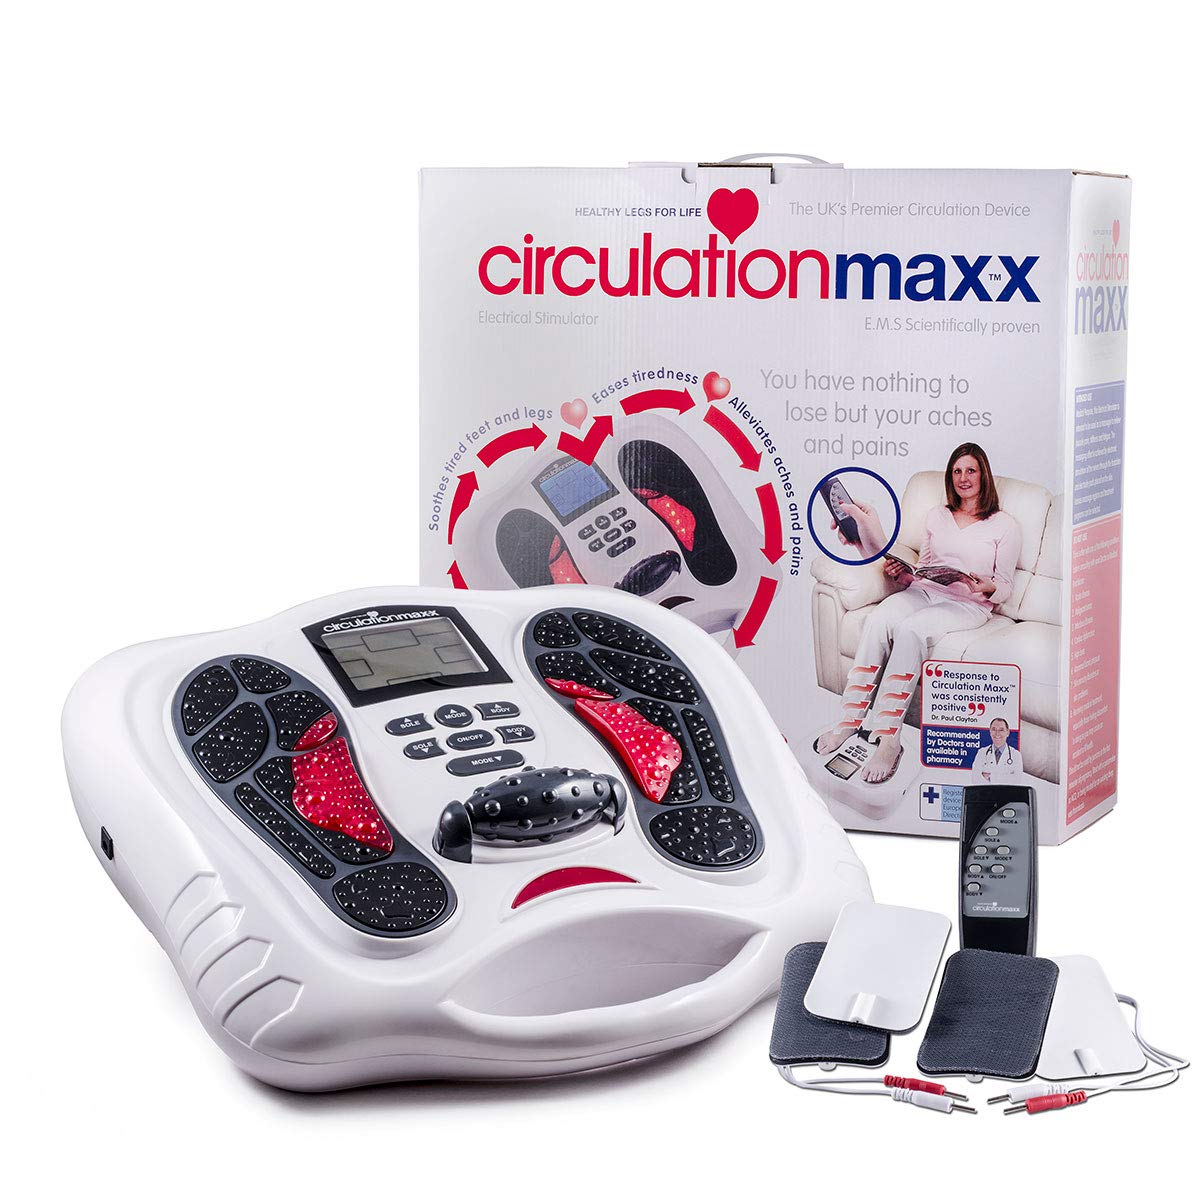 BioEnergiser Circulation Maxx Blood Booster – EMS Muscle Stimulator - Medical IIa Device – Developed In The UK –Increase Blood Circulation/Reduce Swelling -Stop Aches & Pains - As Seen In Press